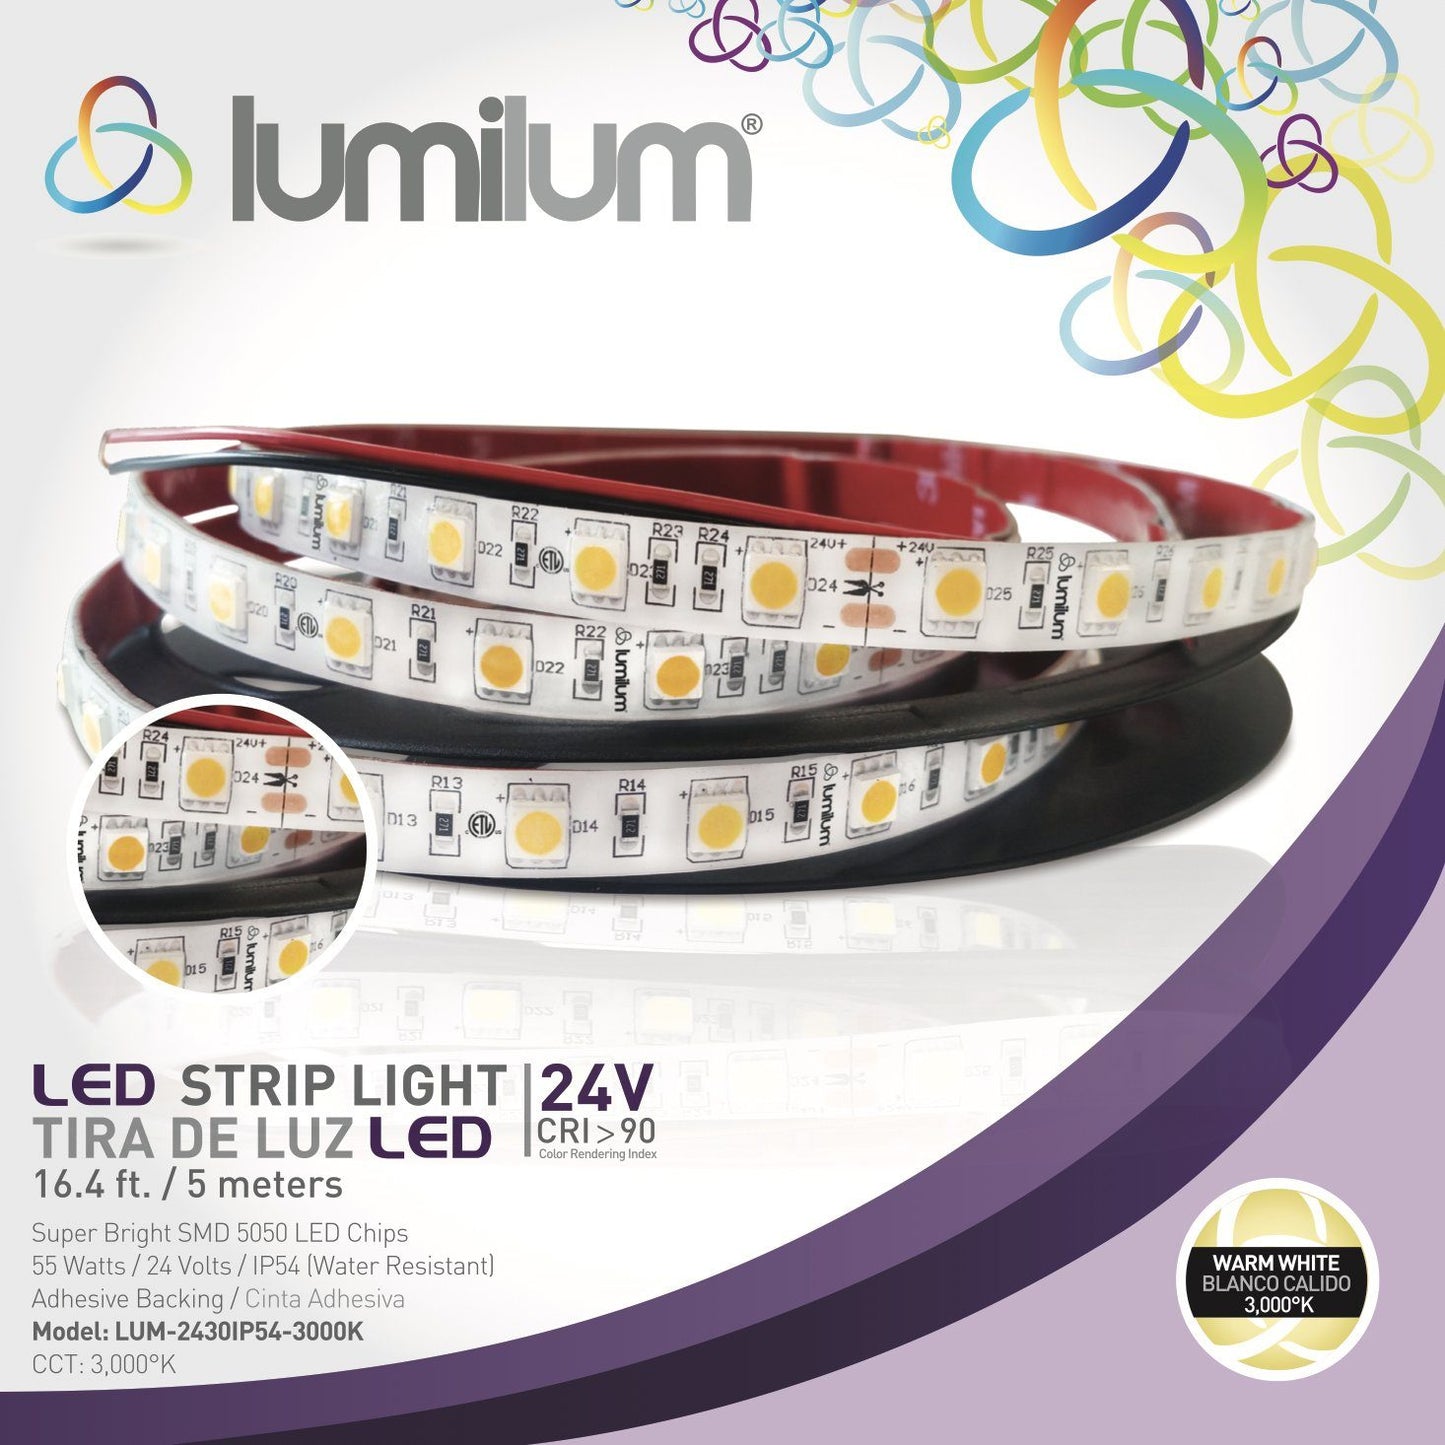 Load image into Gallery viewer, lumilum brand purple led strip light packaging with strip light image and 3000k product information text
